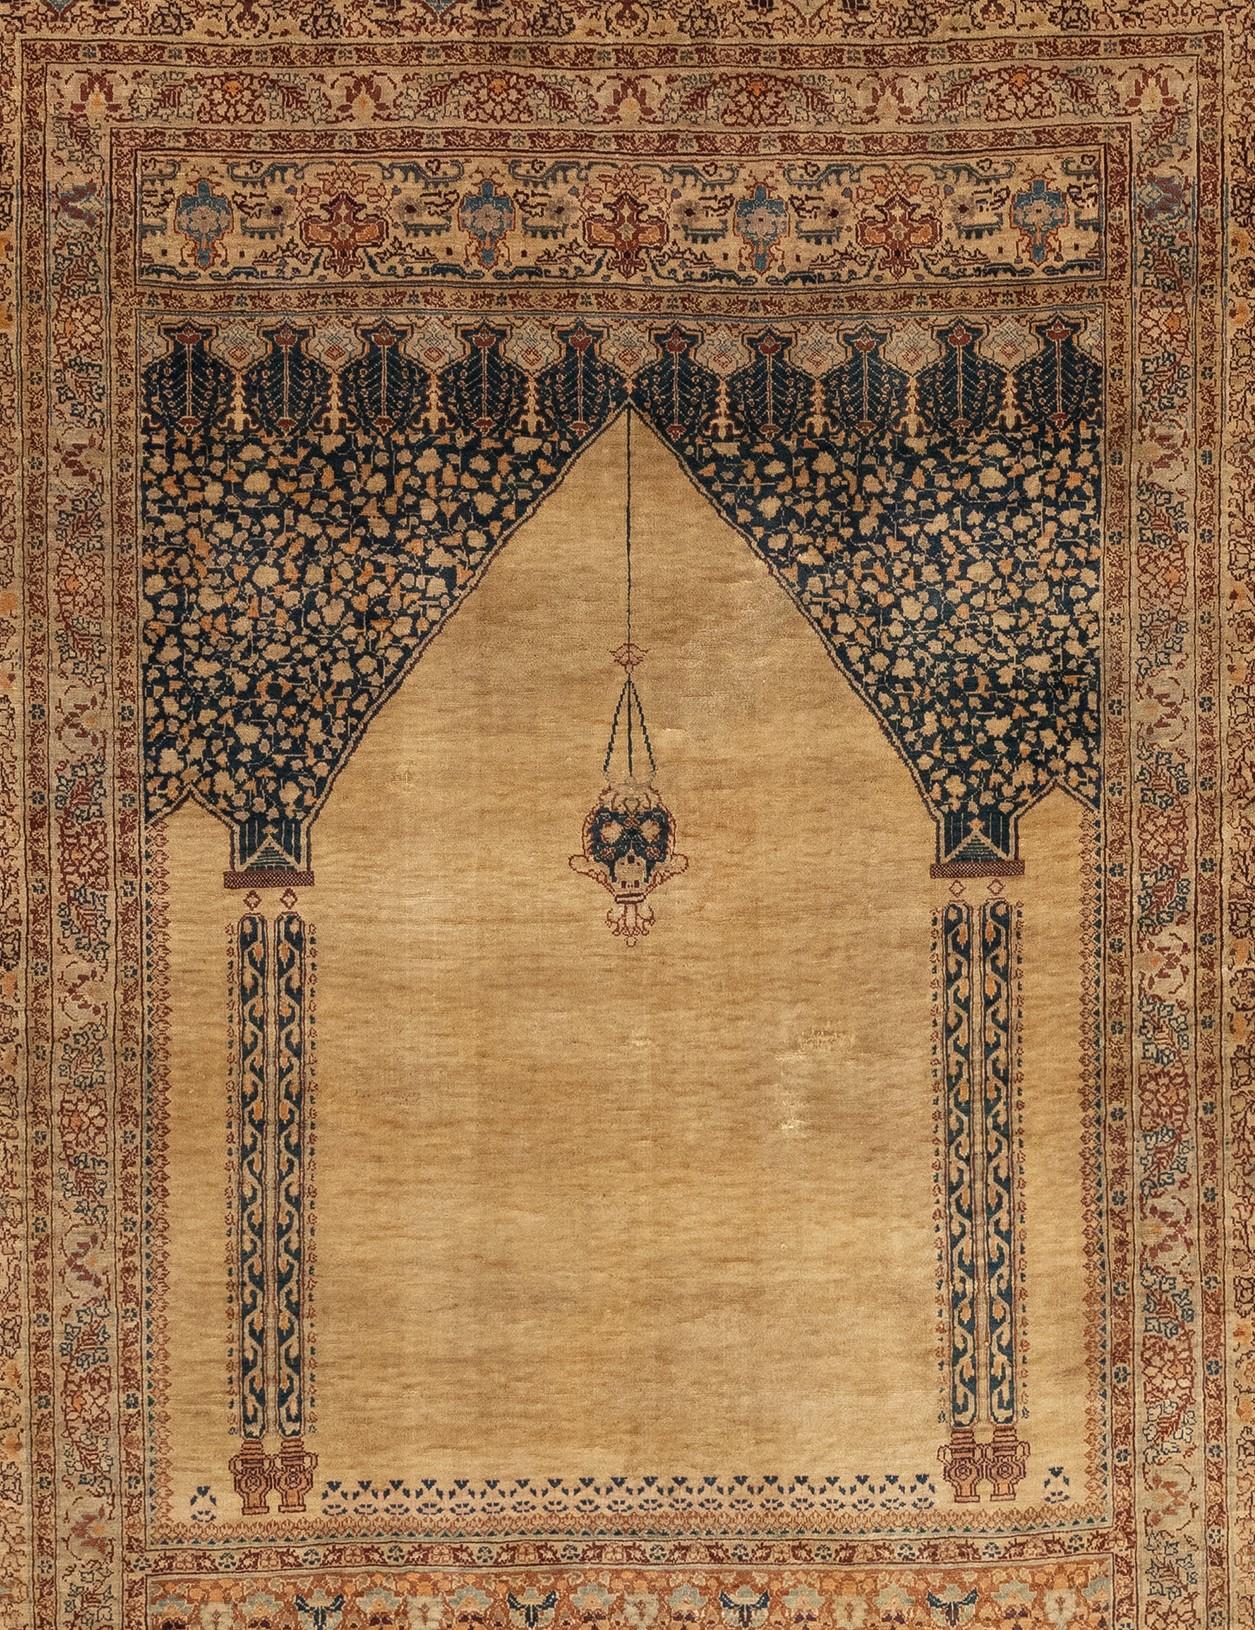 An antique Turkish Kaiseri prayer rug from the 1880s. It features a finely woven silk in the Turkish style with an ecru field. The rug has a scalloped top with a mosque lamp and two ornamental columns supporting a deep spandrel panel. Above and